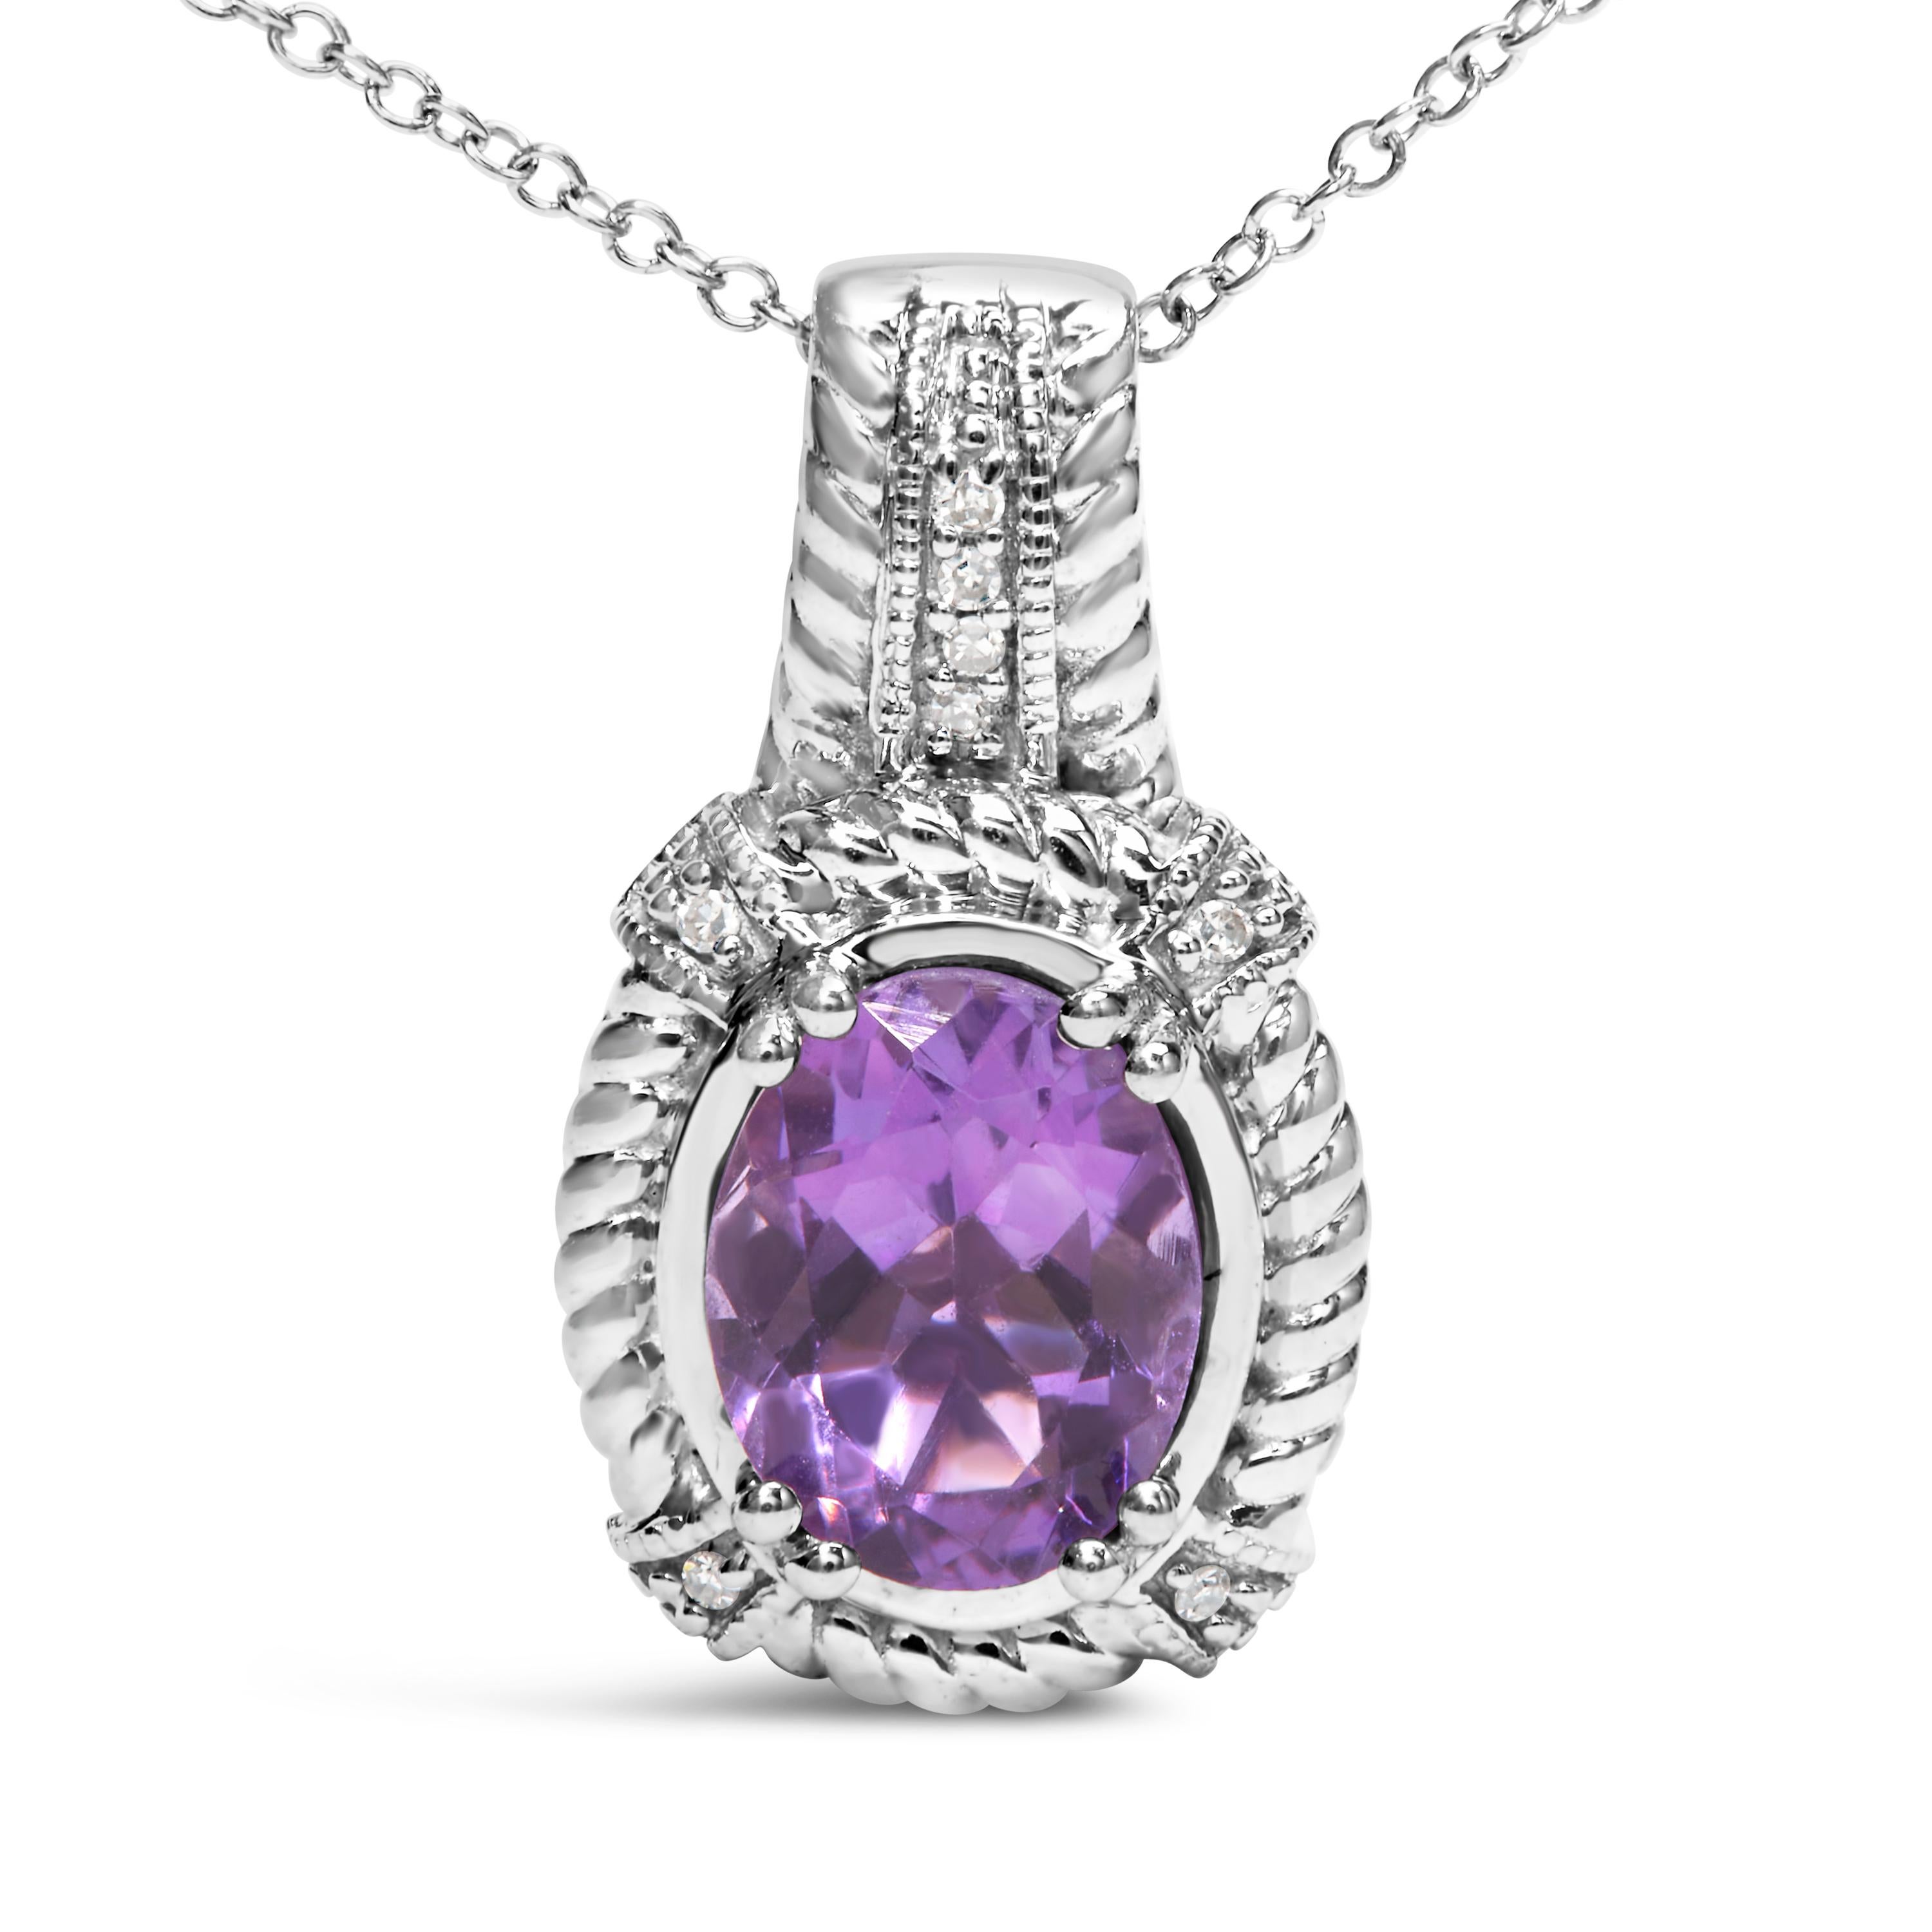 Introducing a truly captivating piece that will make heads turn. This exquisite .925 Sterling Silver drop pendant necklace showcases a stunning 9x7mm oval purple amethyst gemstone, exuding an enchanting allure. Adorned with 8 round diamonds, this